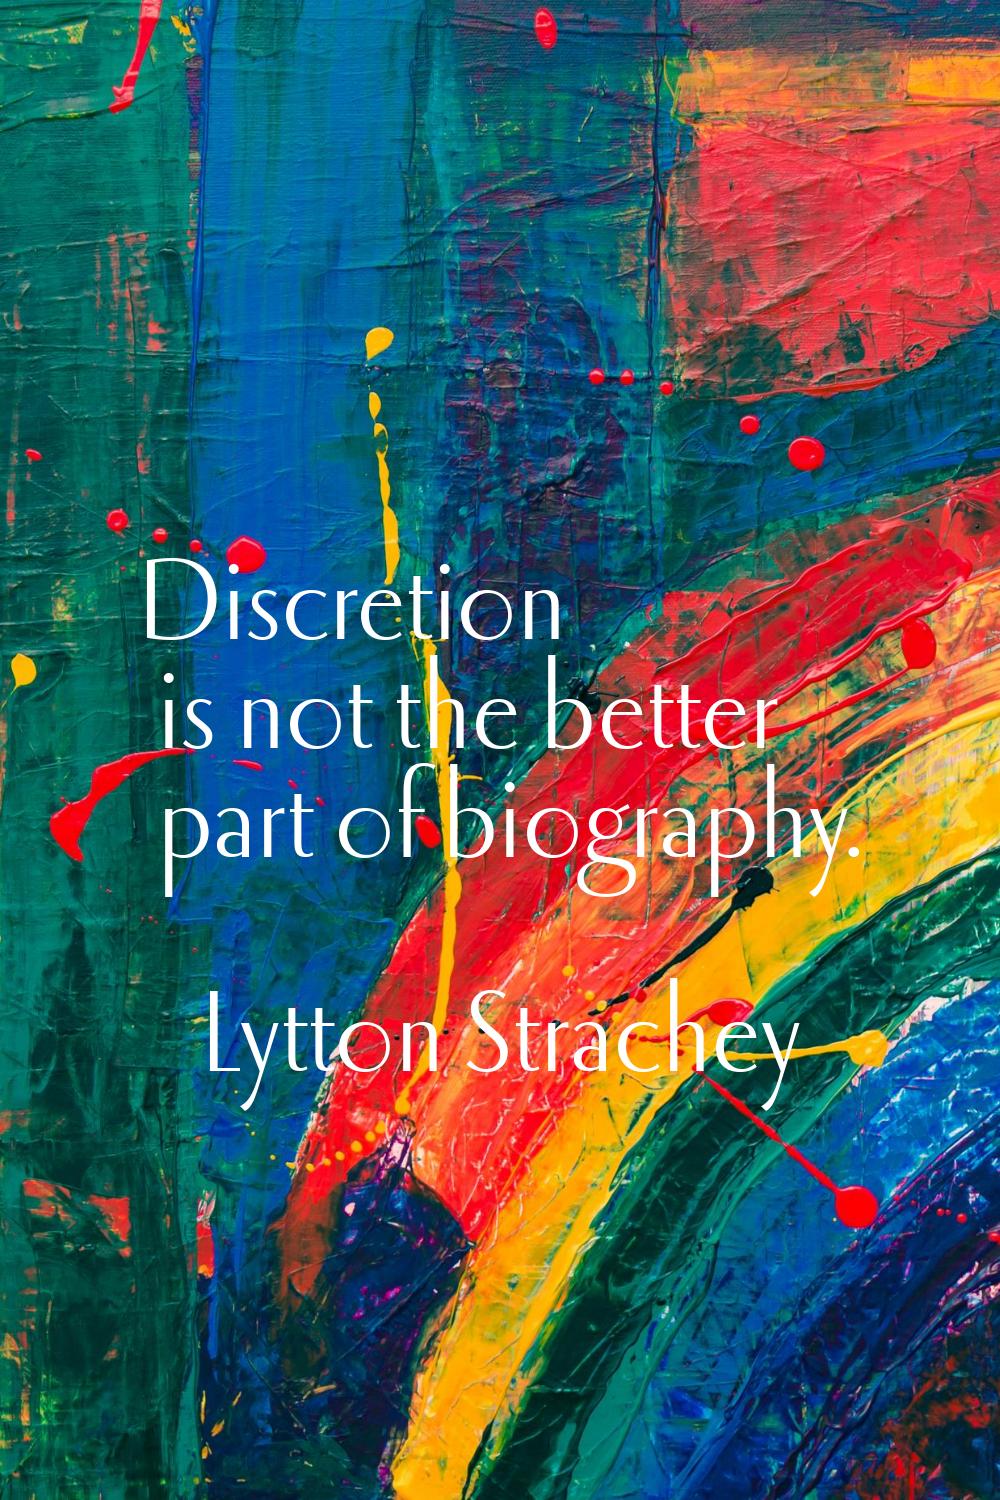 Discretion is not the better part of biography.